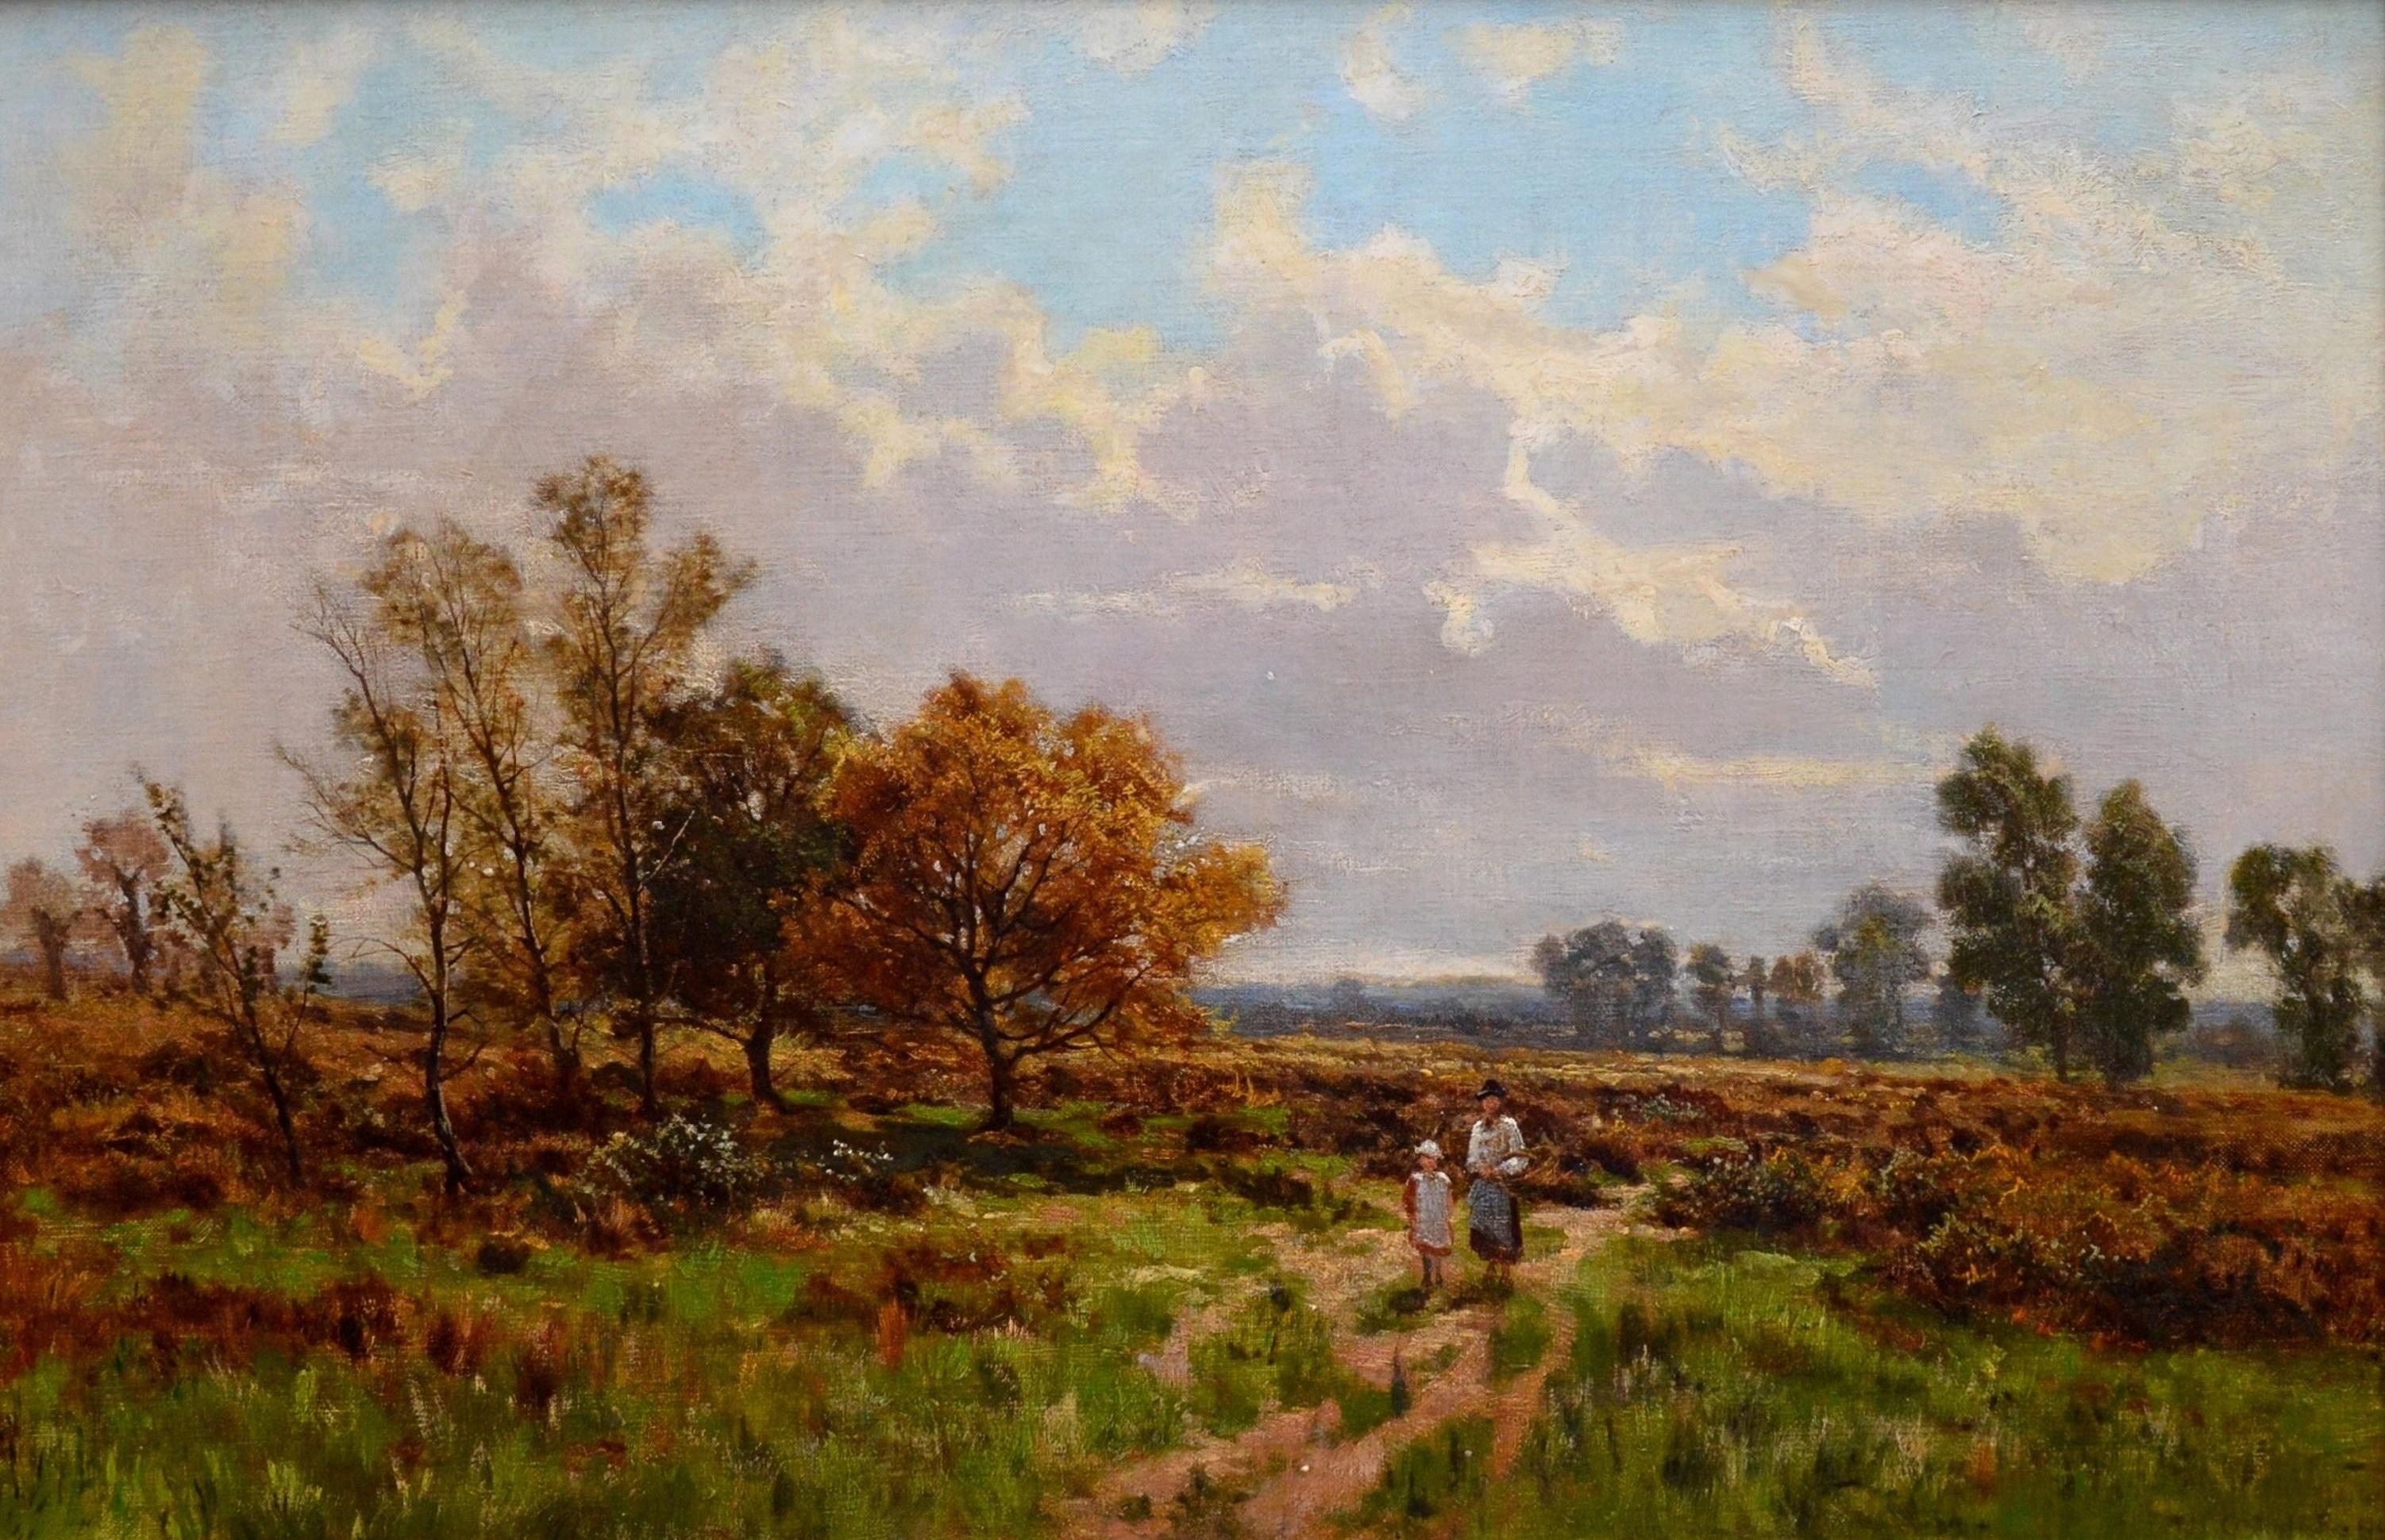 Near Stratford on Avon - 19th Century English Landscape Oil Painting Shakespeare - Brown Figurative Painting by Arthur Bevan Collier